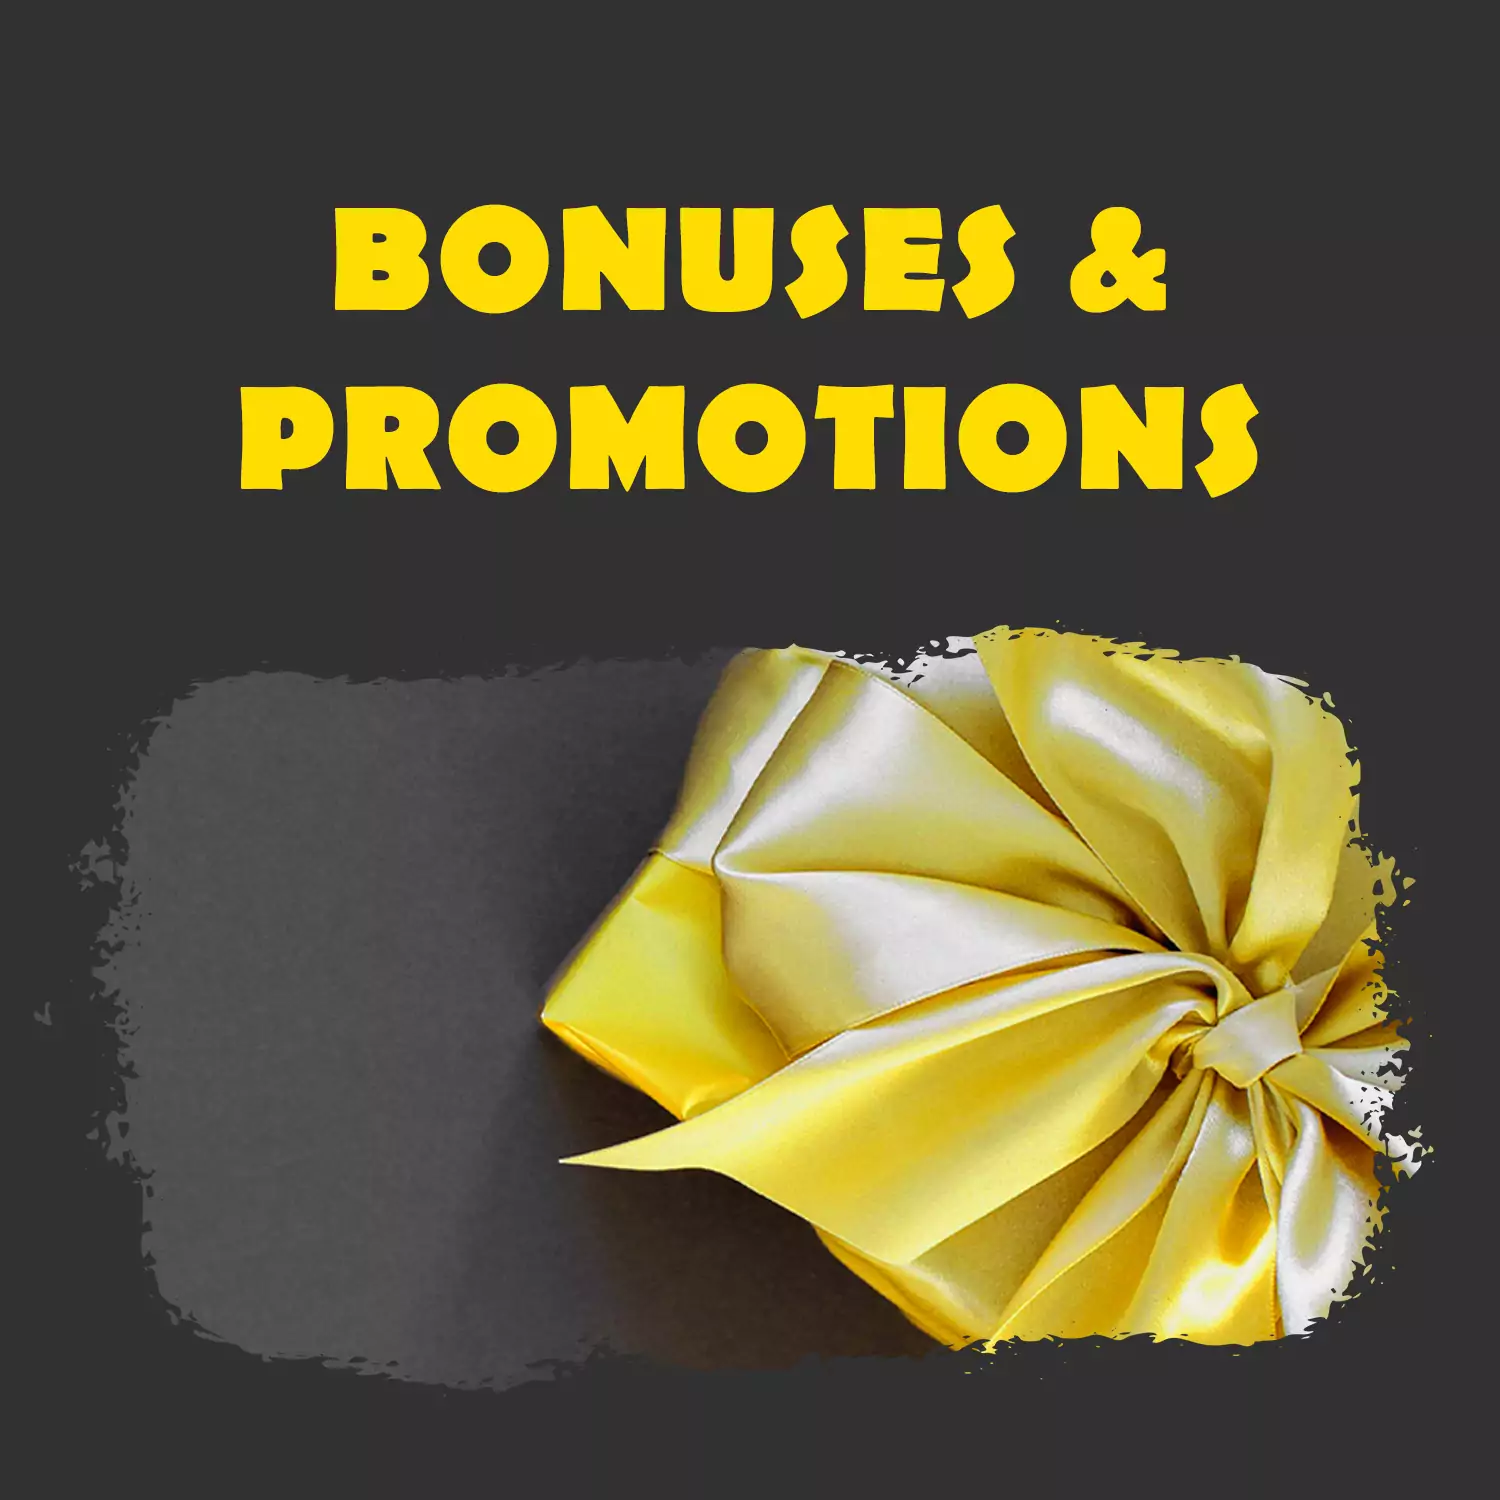 In addition to the main promotion, there are also some other bonus offers for users of Bet365.